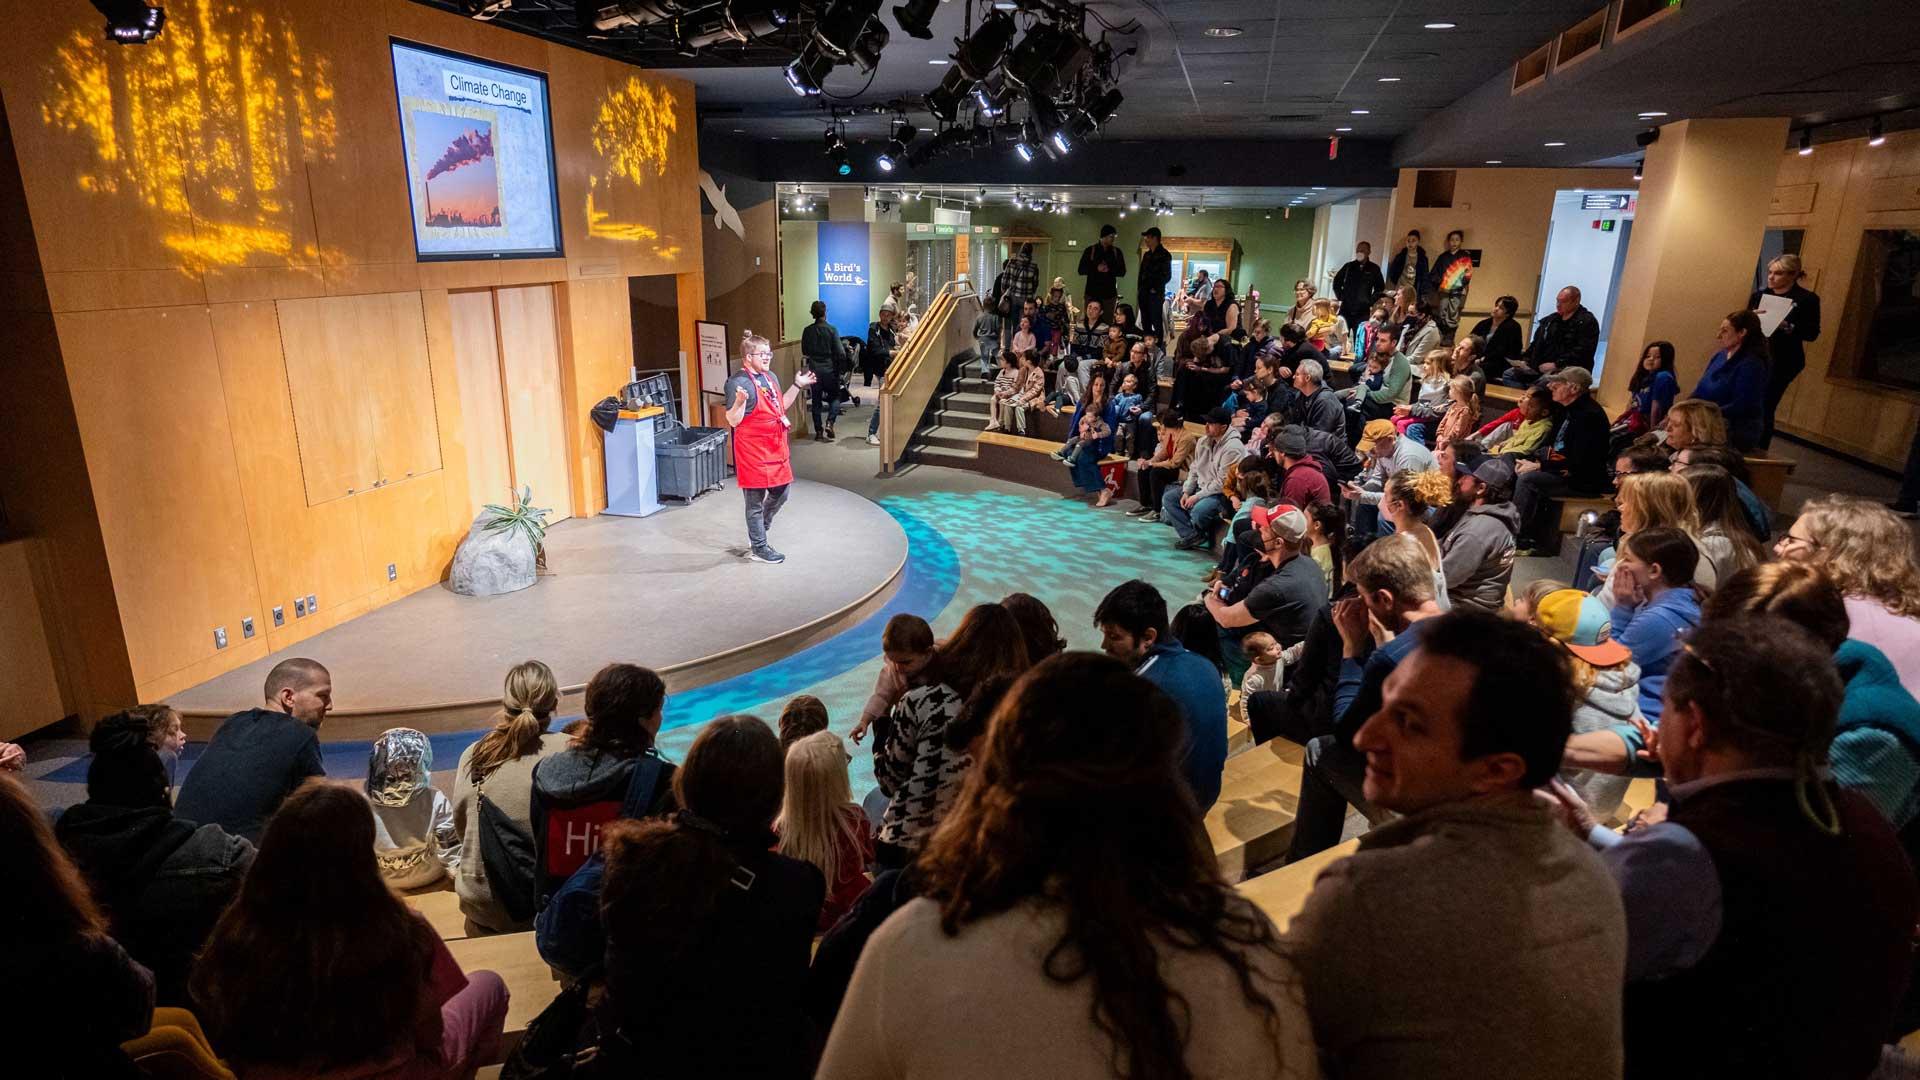 A museum eductaor on the Shapiro Science Live Stage in front of an Audience.